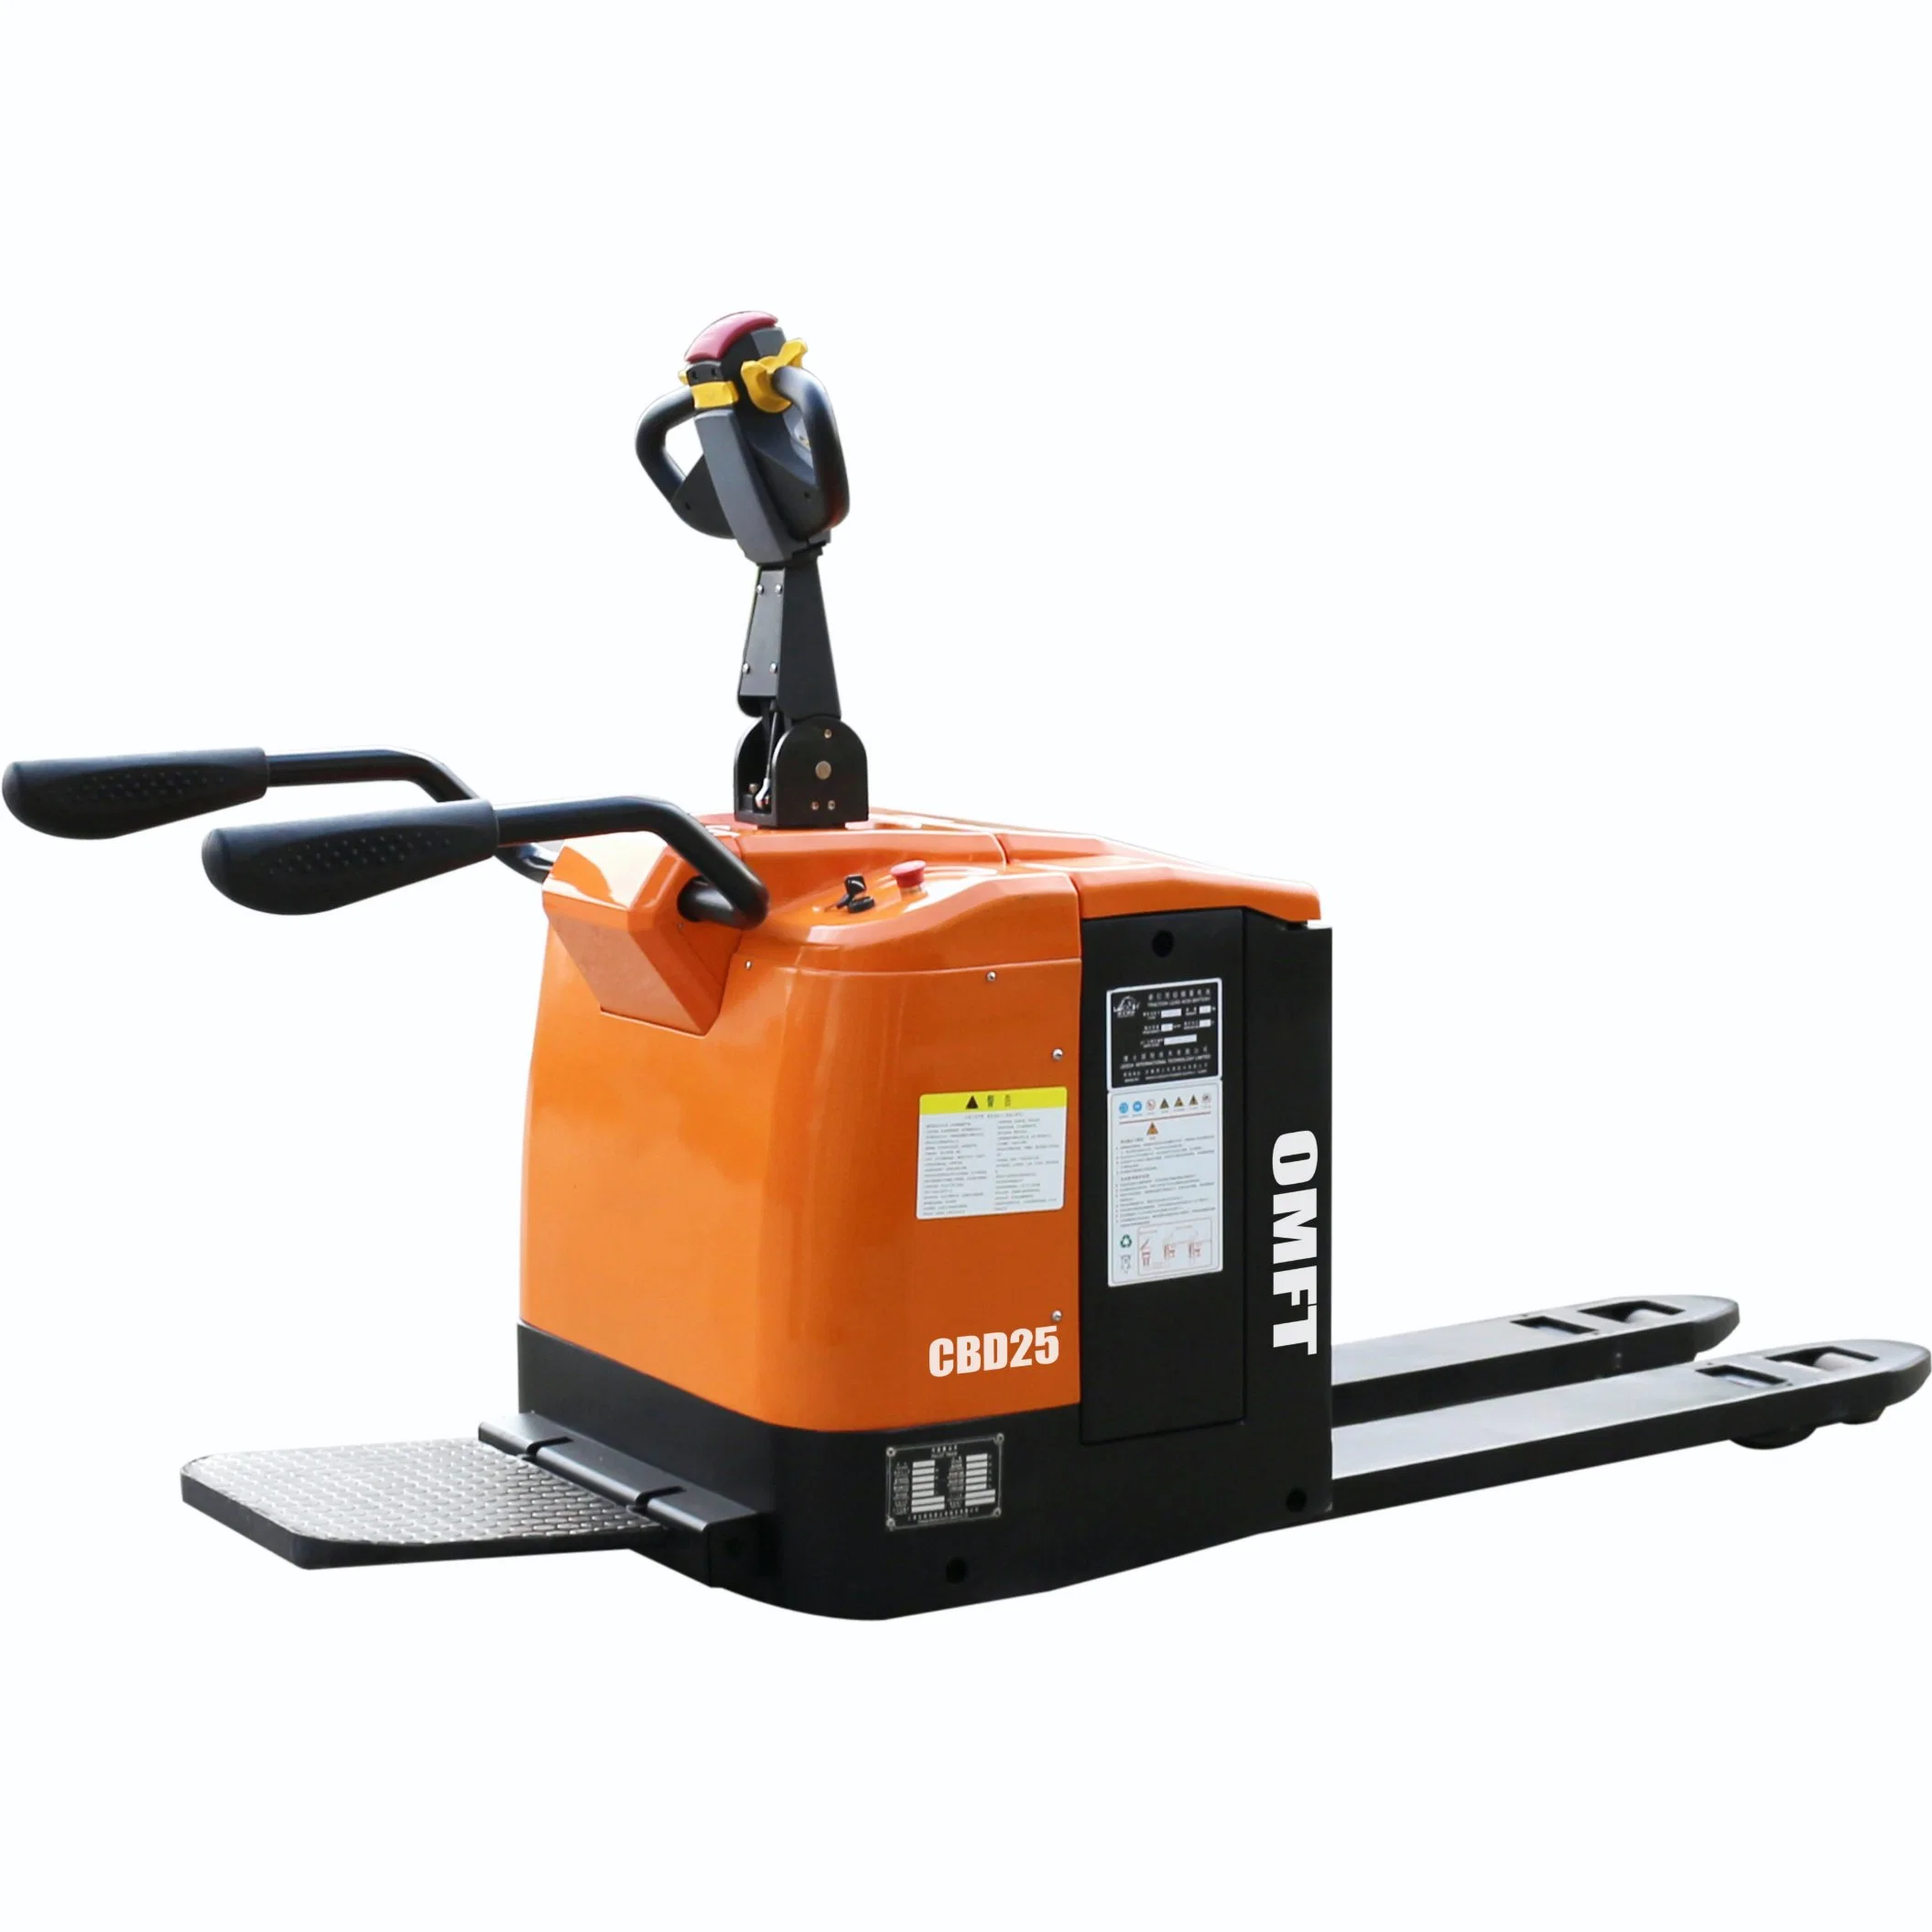 Omft Stand-on Type Electric Powered Pallet Truck Full Electric Pallet Truck 2.5 T 2.5 Ton with AC System